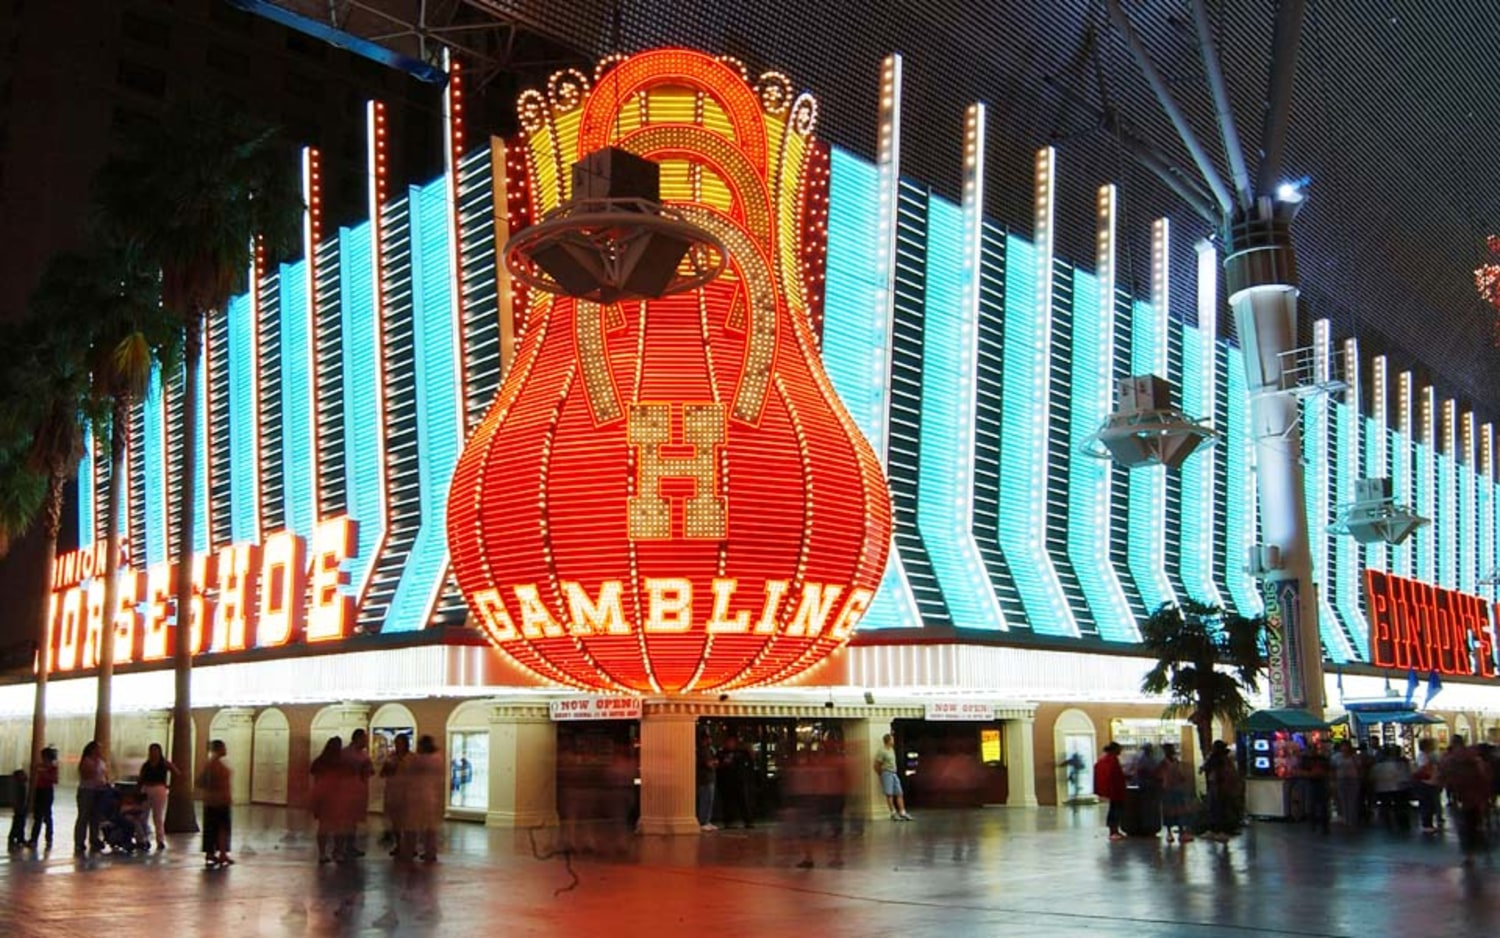 Ten Years Ago Today: The Closing of Binion's Horseshoe (Part 1